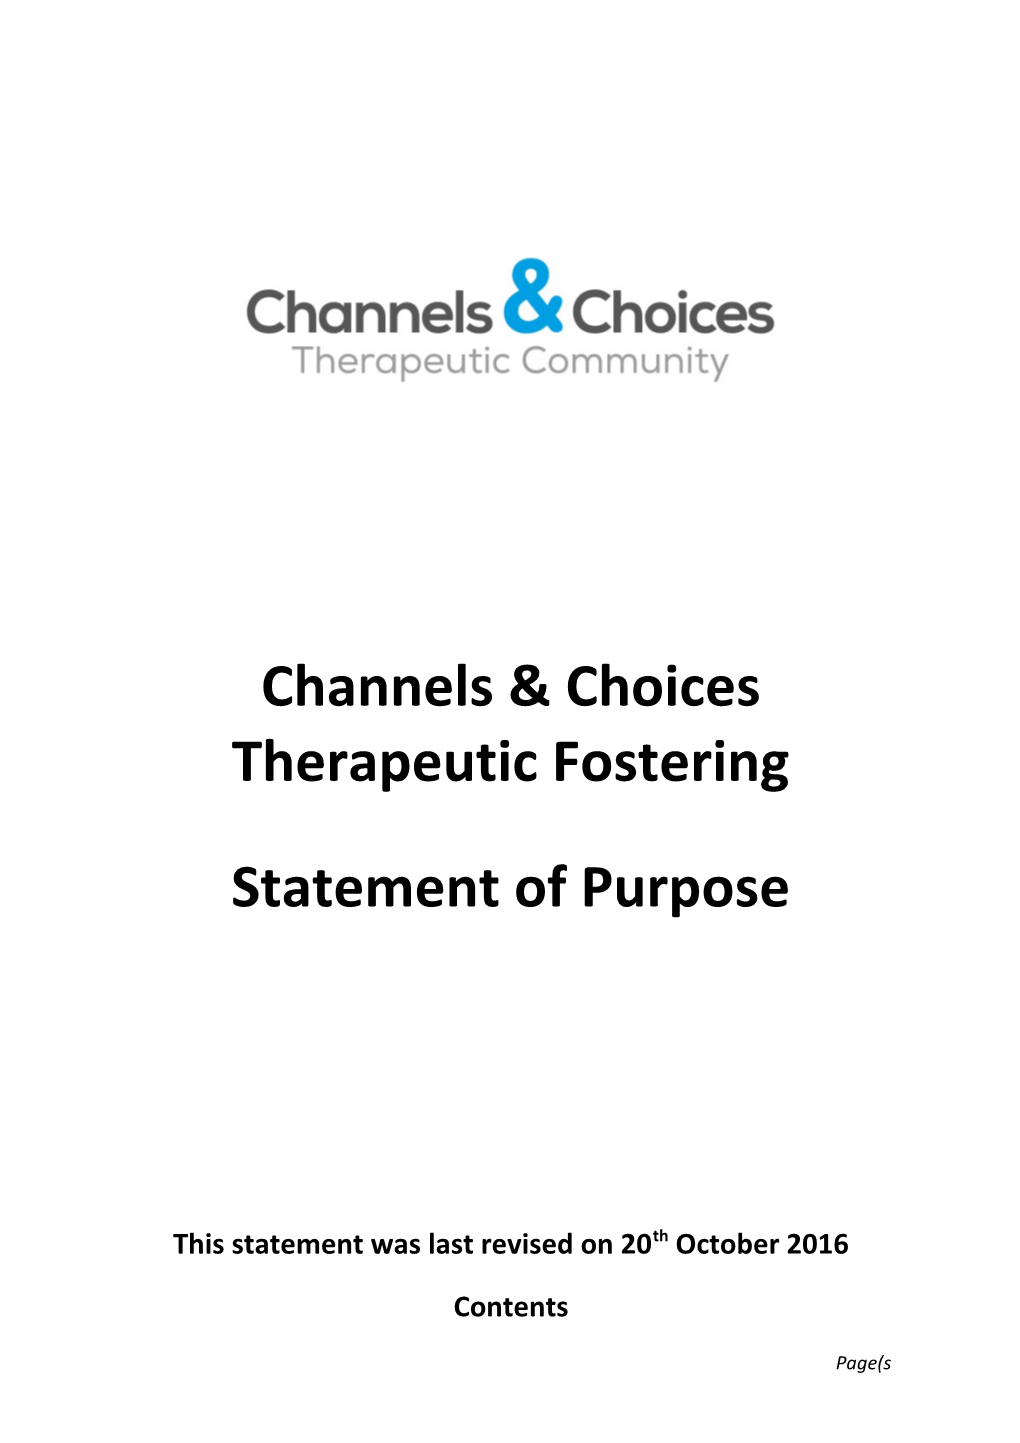 Channels & Choices Therapeutic Fostering